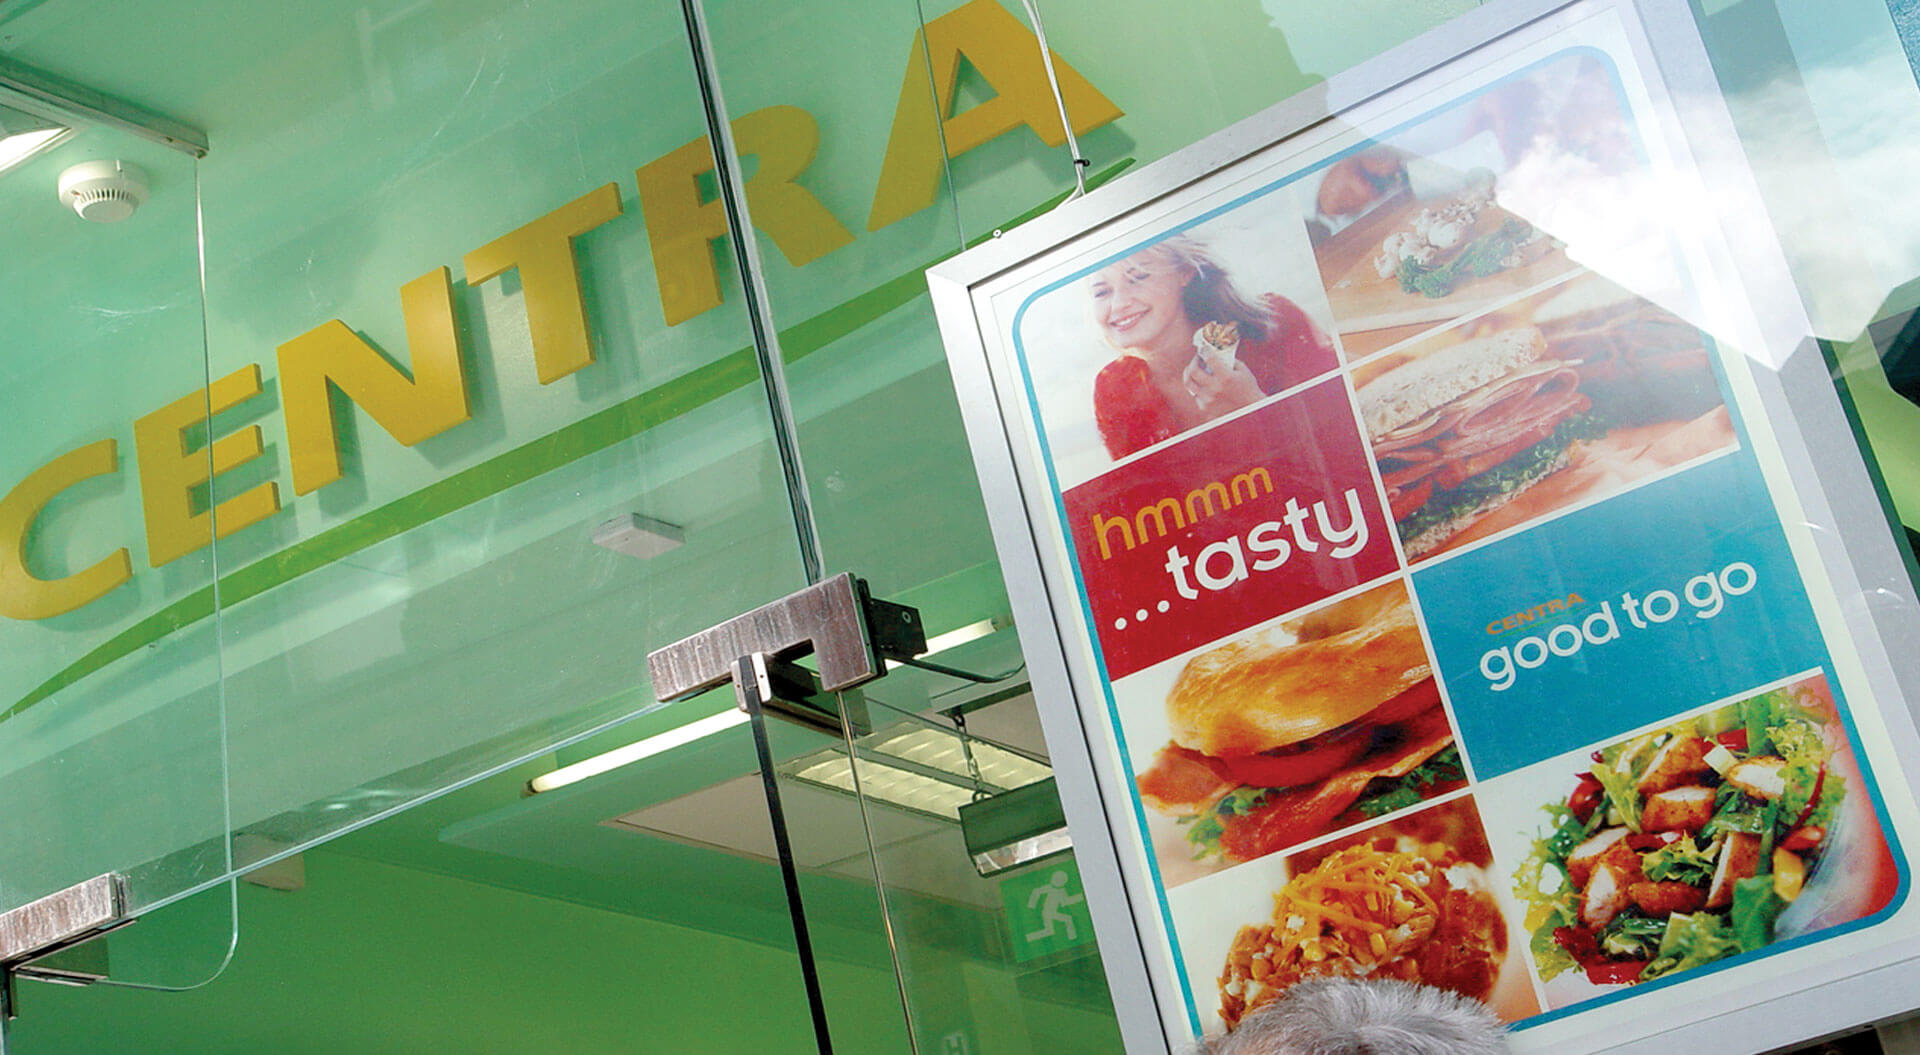 Centra good to go sub-brand identity for convenience supermarkets